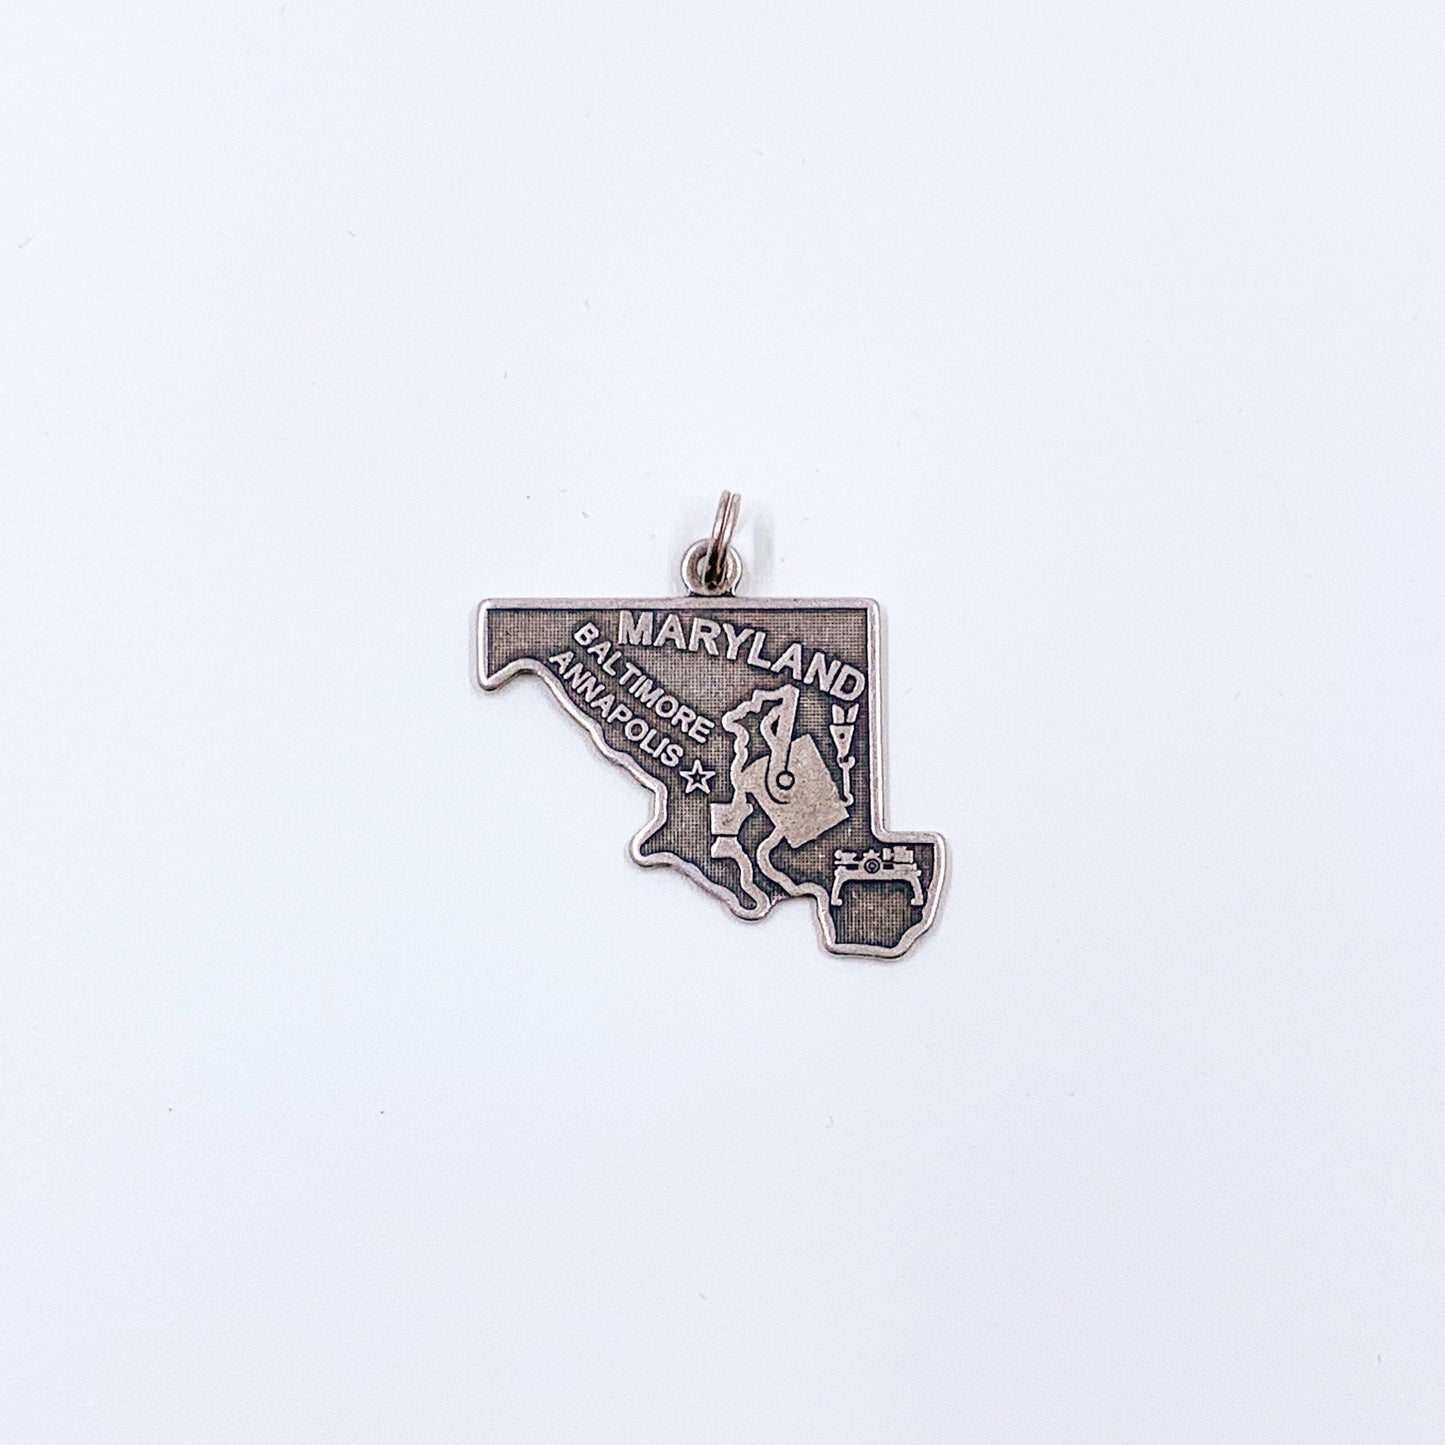 Vintage Maryland State Charm | Silver State of Maryland Charm